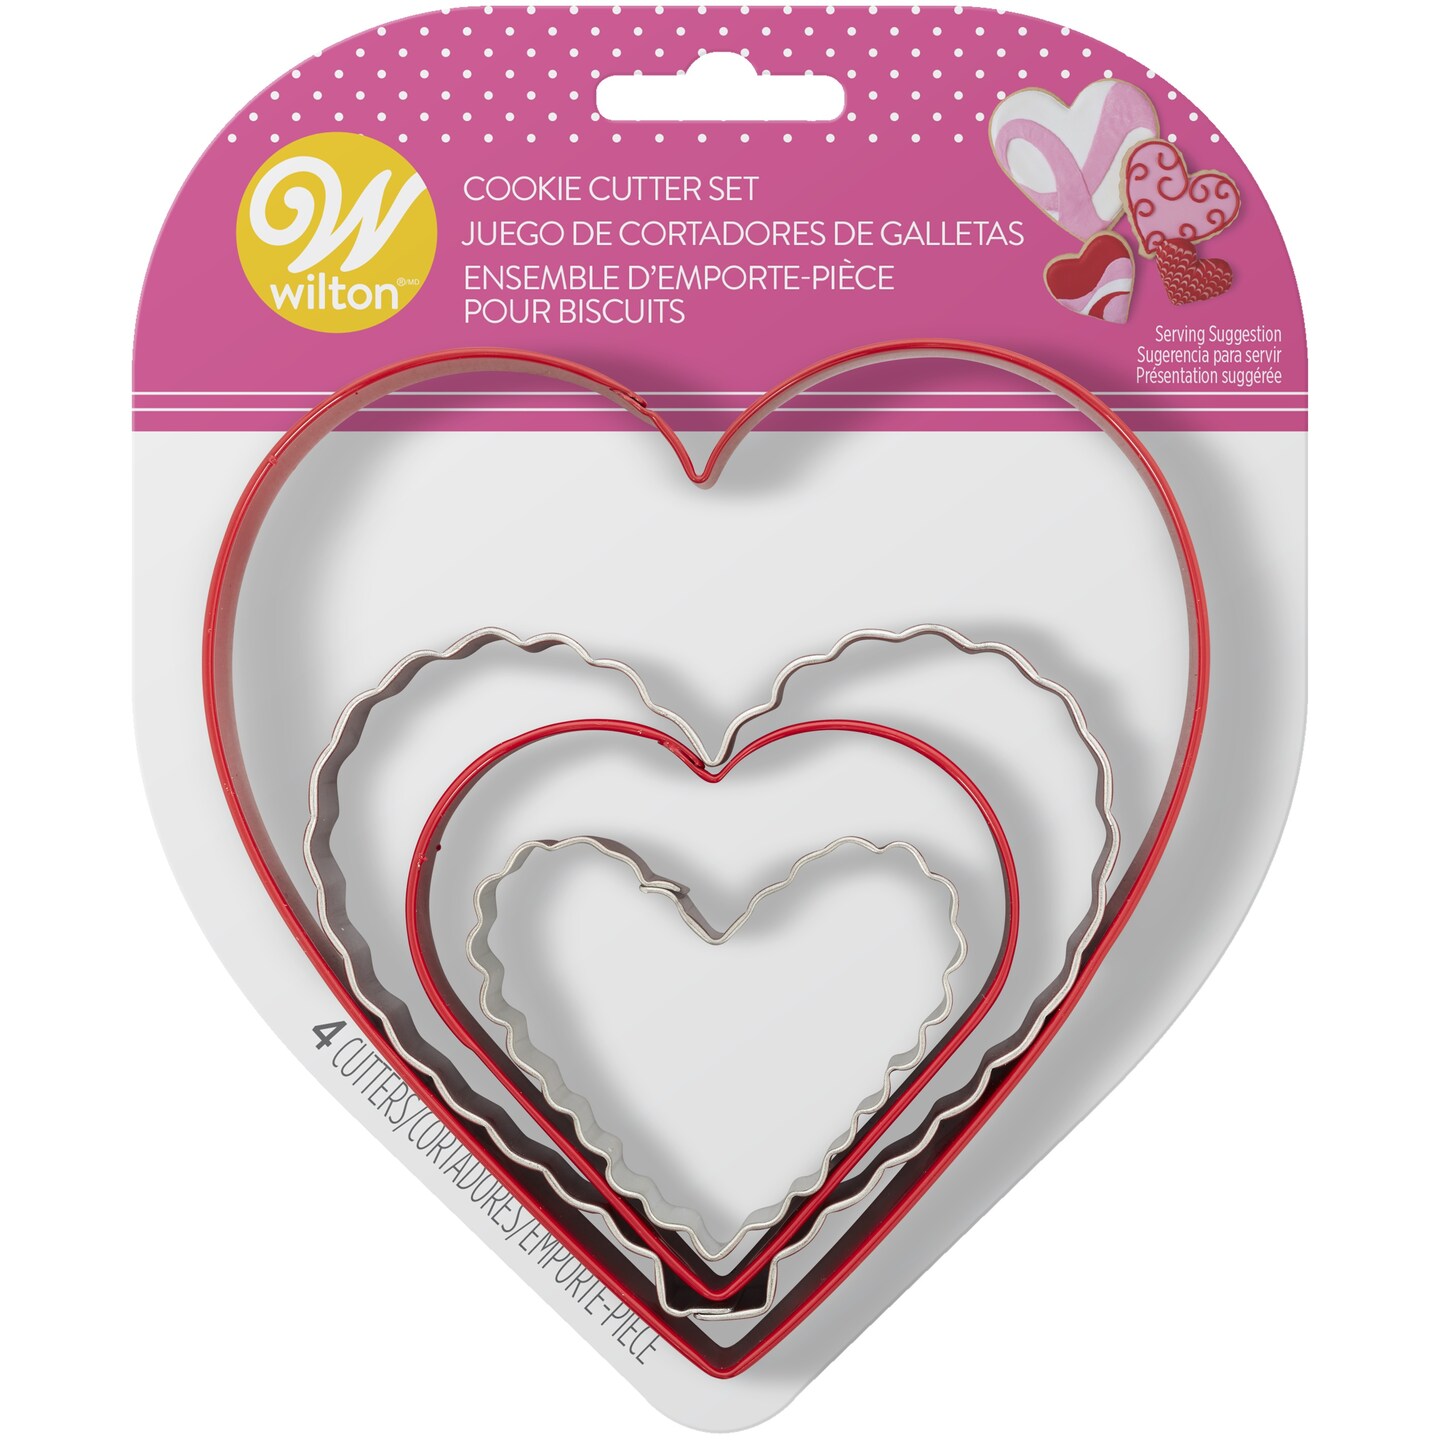 BCHOCKS Heart Cookie Cutter Set 7 Pcs with 100 Pcs 4 Clear Pink Heart  Biscuit Bags - Valentine Day Cookie Cutters Set Stainless Steel Biscuit  Pastry